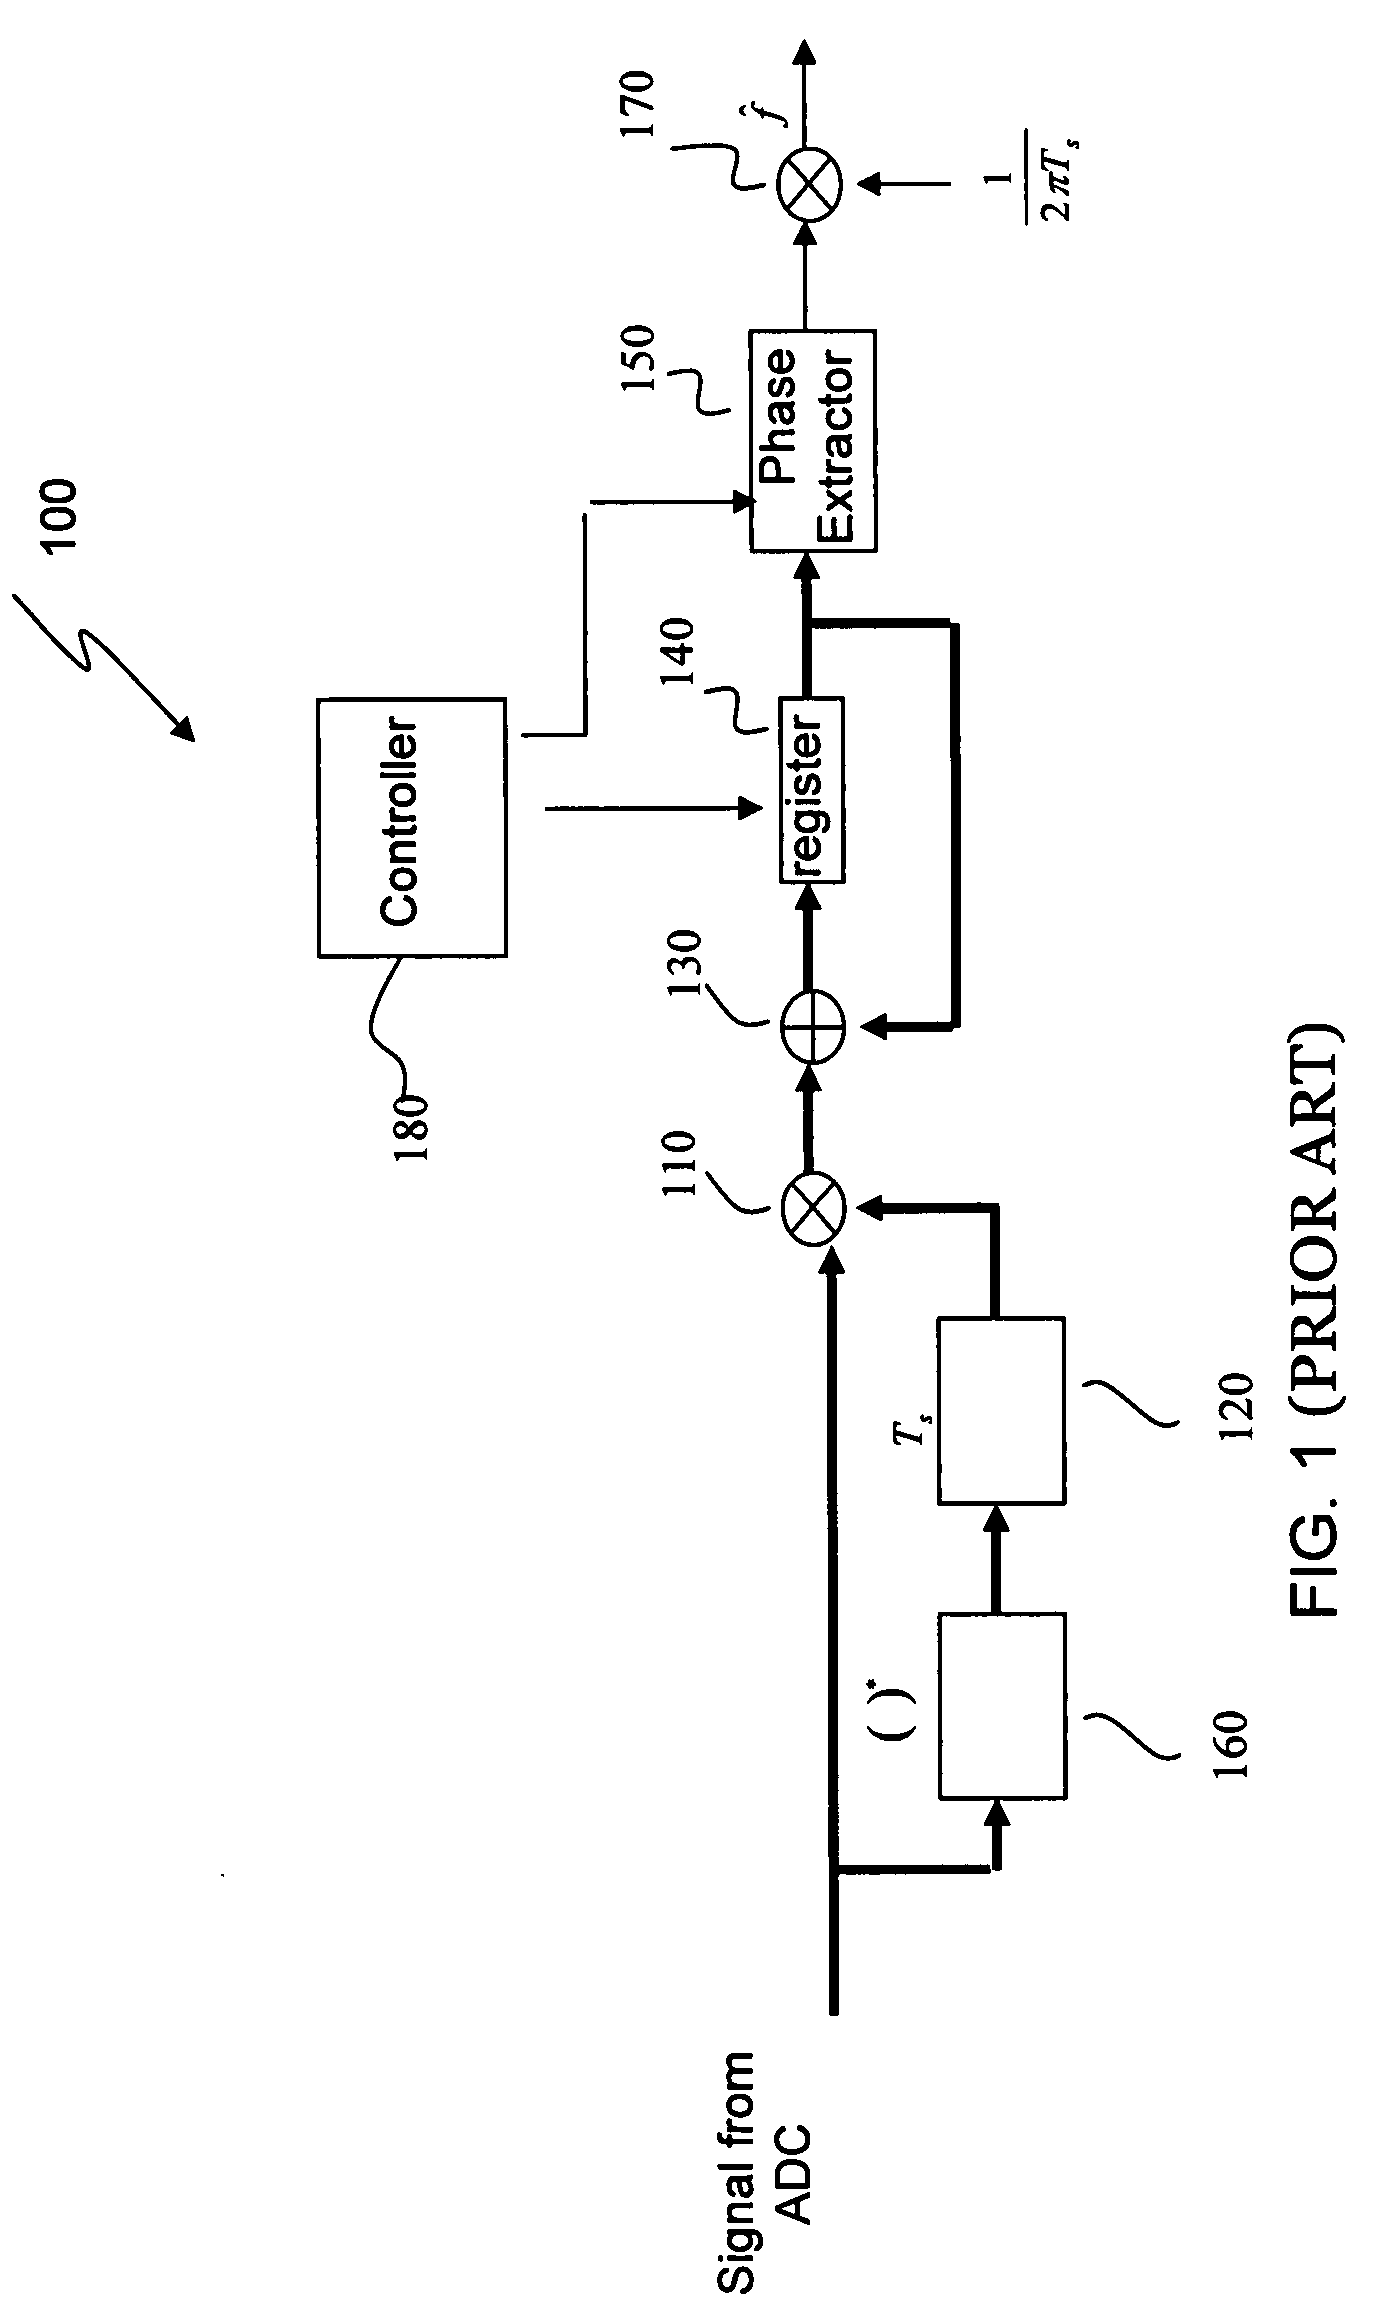 Apparatus and method for frequency estimation in the presence of narrowband gaussian noise